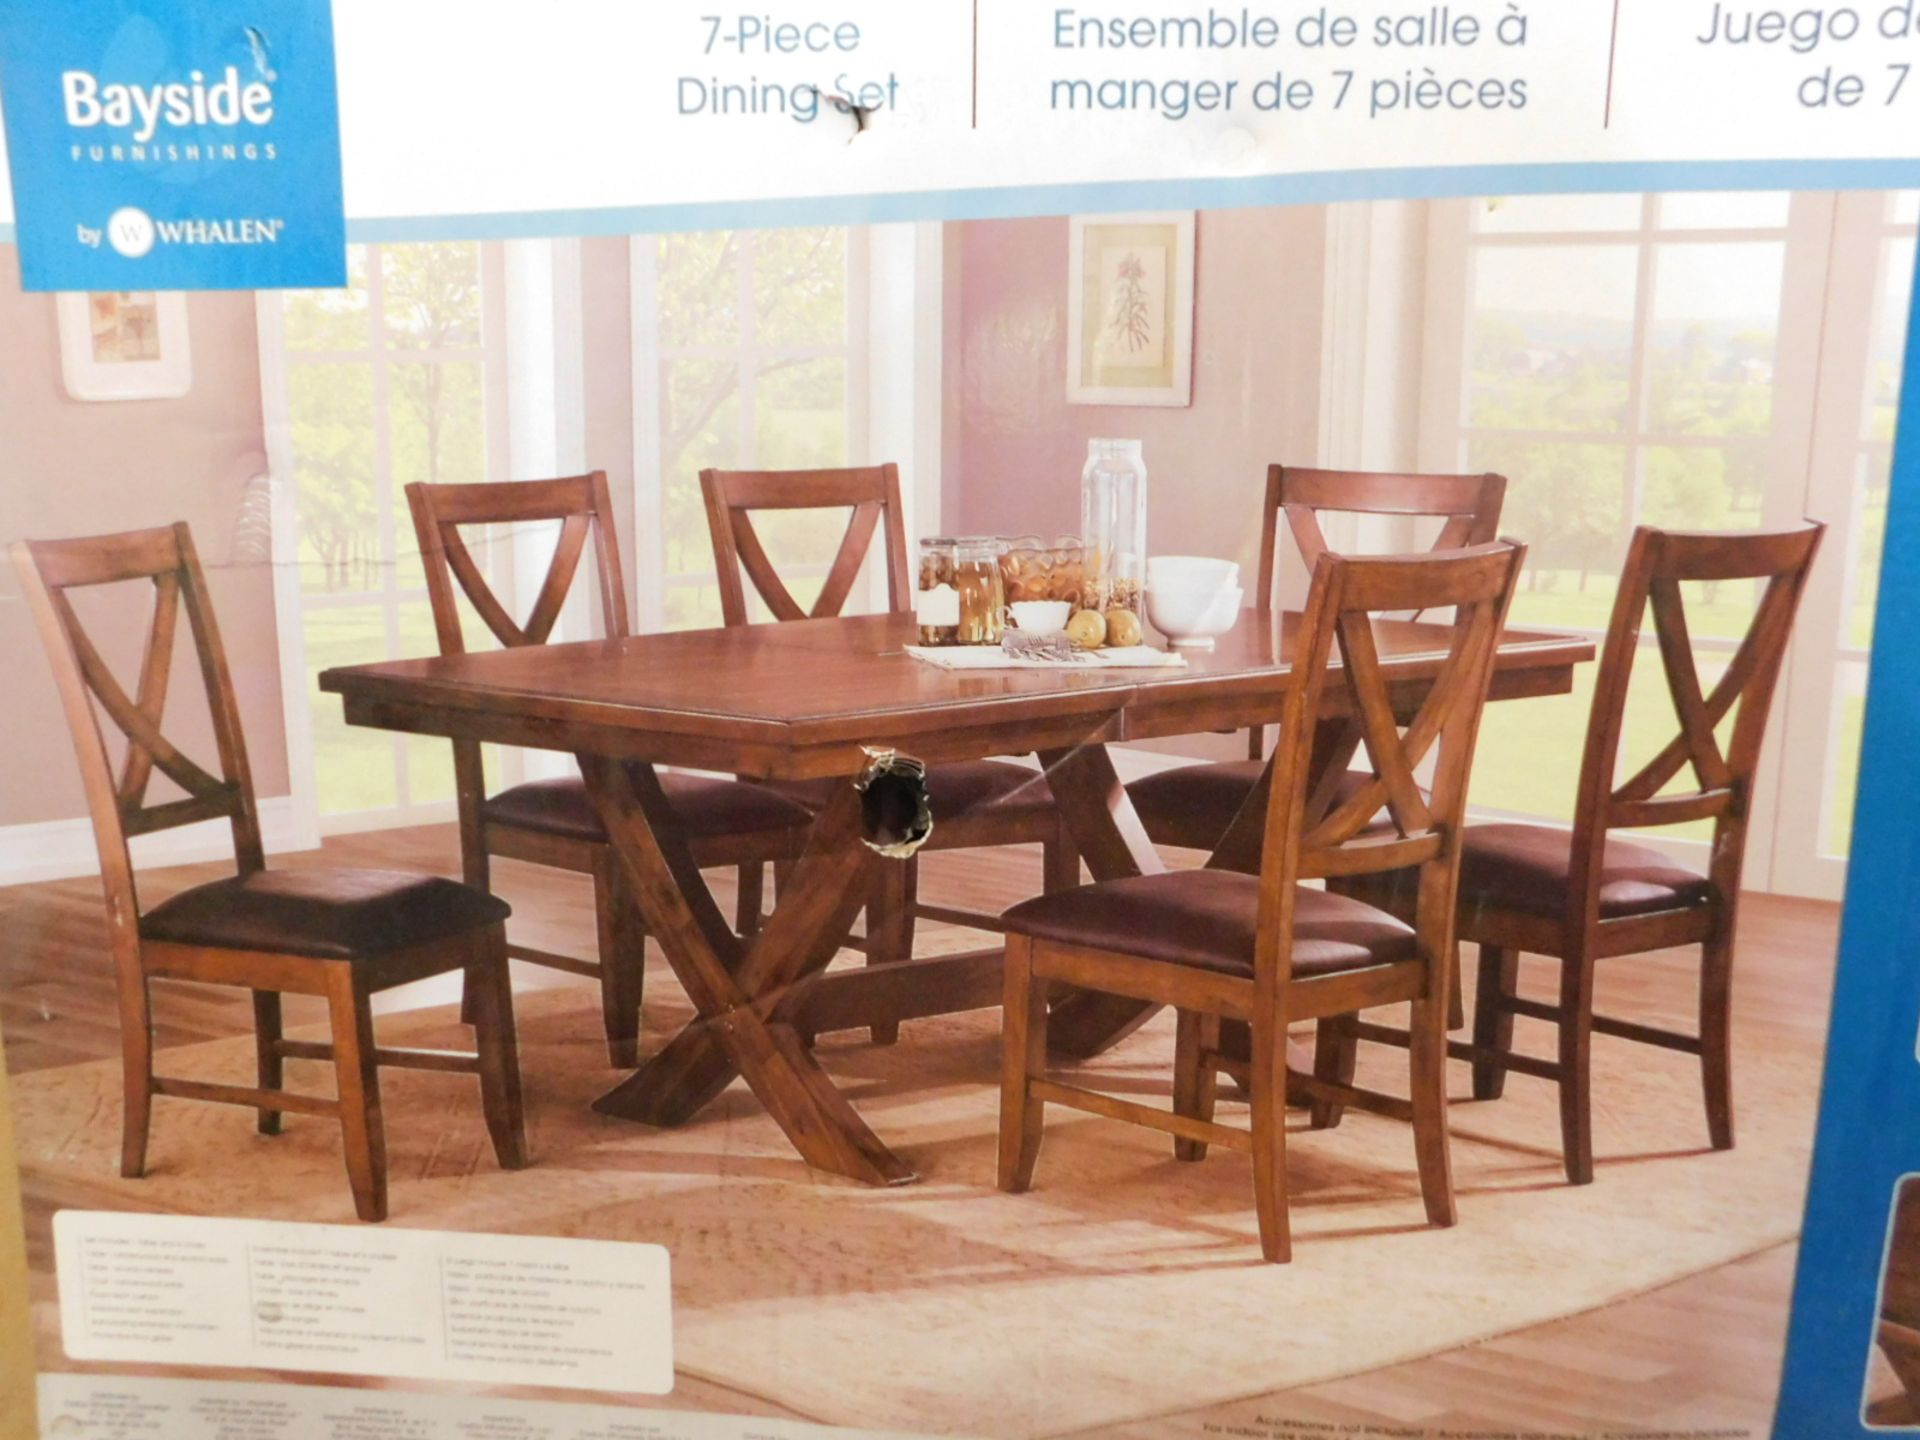 1 BOXED BAYSIDE FURNISHINGS 3 PIECE EXTENDABLE DINING SET RRP £799